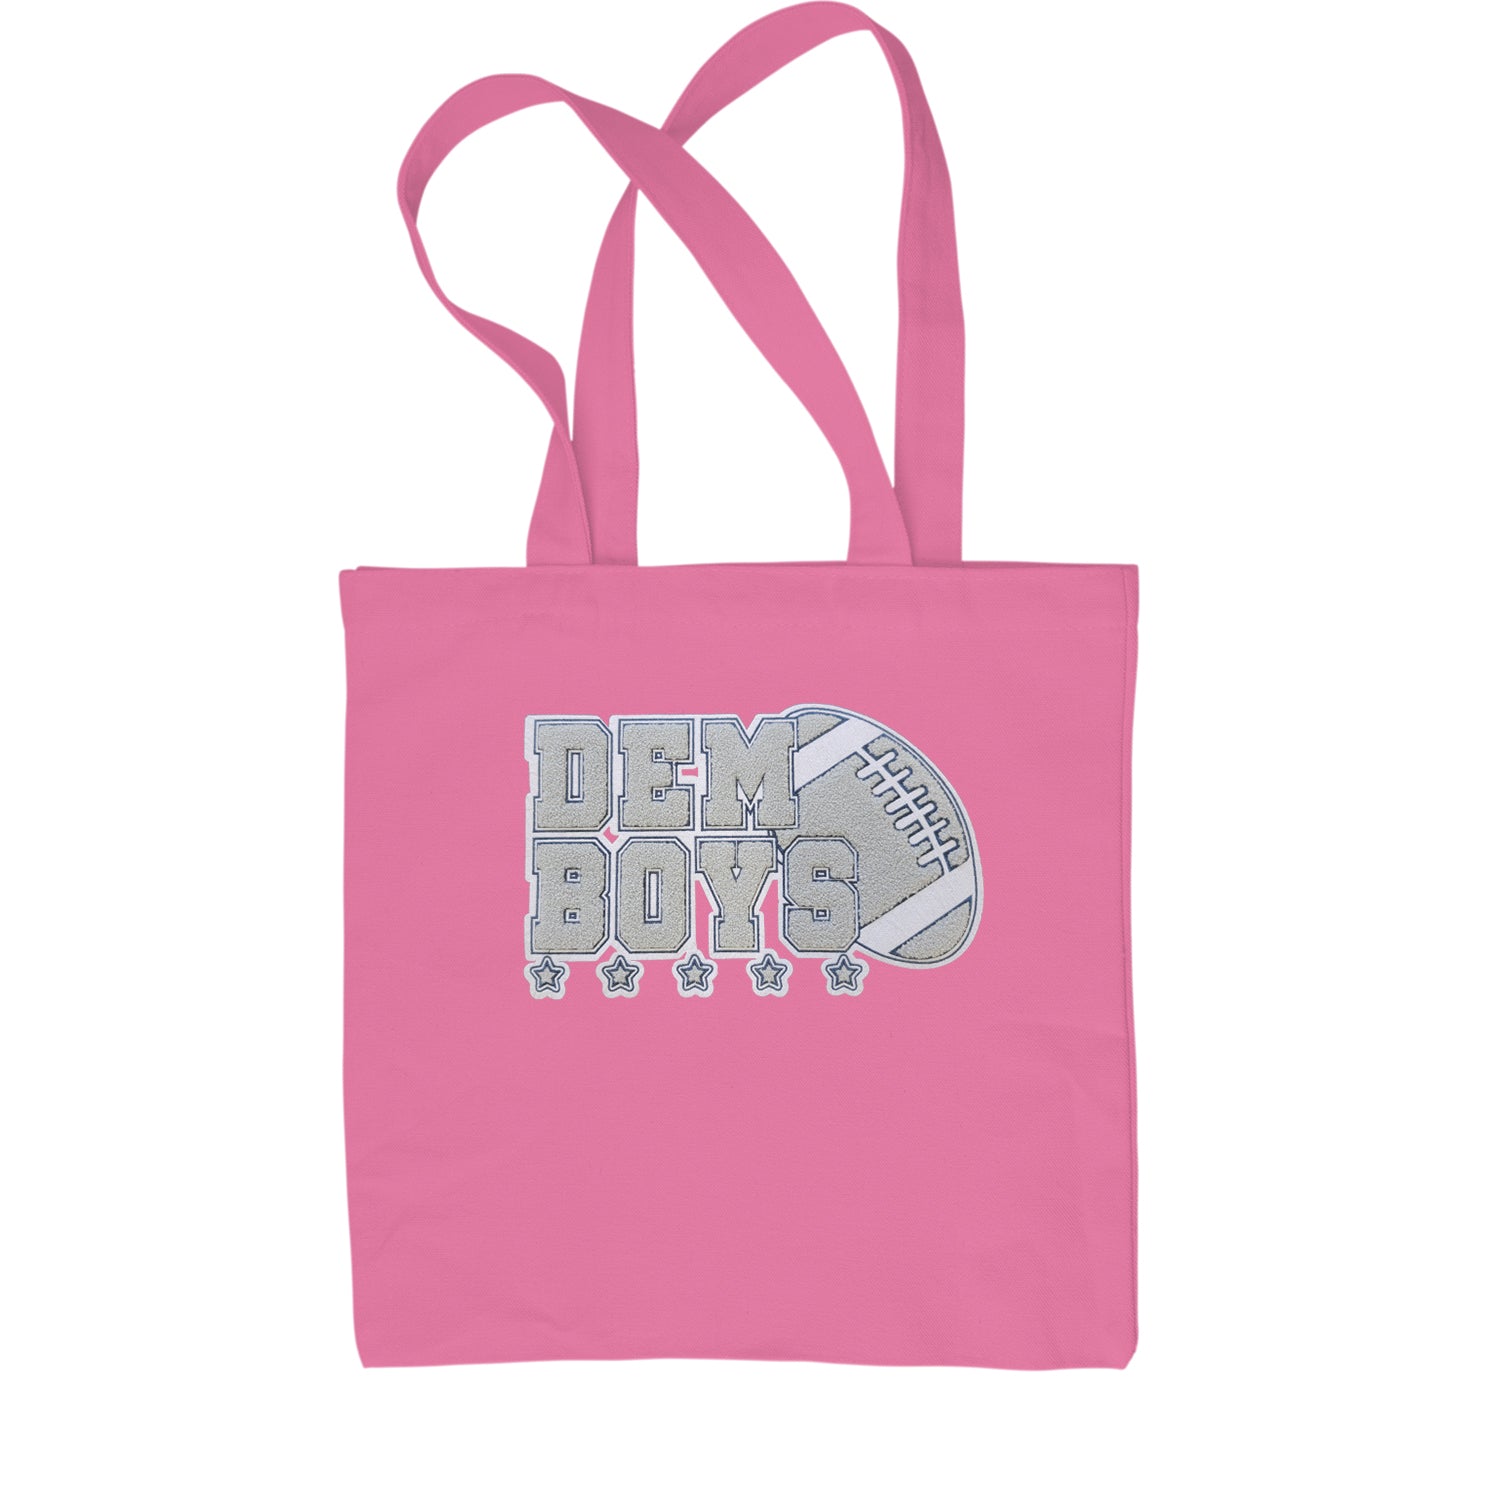 Dem Boys Embroidered Patch 2 Shopping Tote Bag dallas, fan, jersey, team, texas by Expression Tees